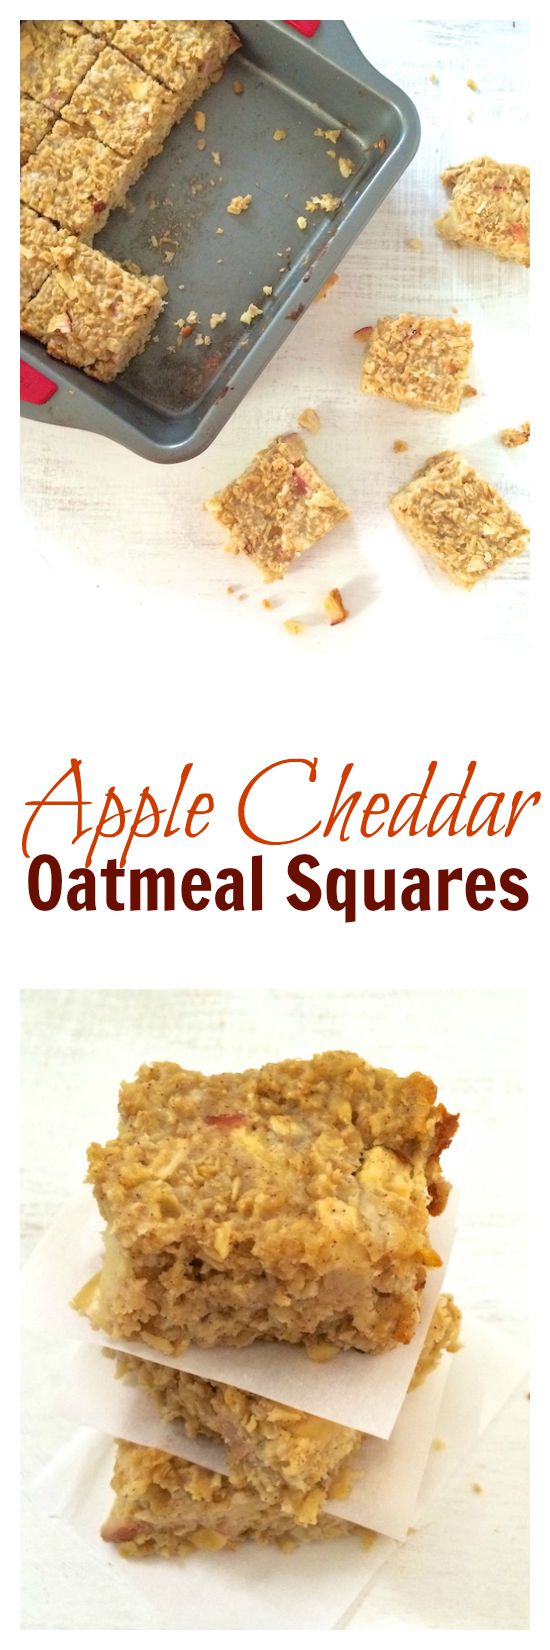 Apple Cheddar Oatmeal Squares - easy to make and perfect for a quick breakfast or snack. @tspbasil 